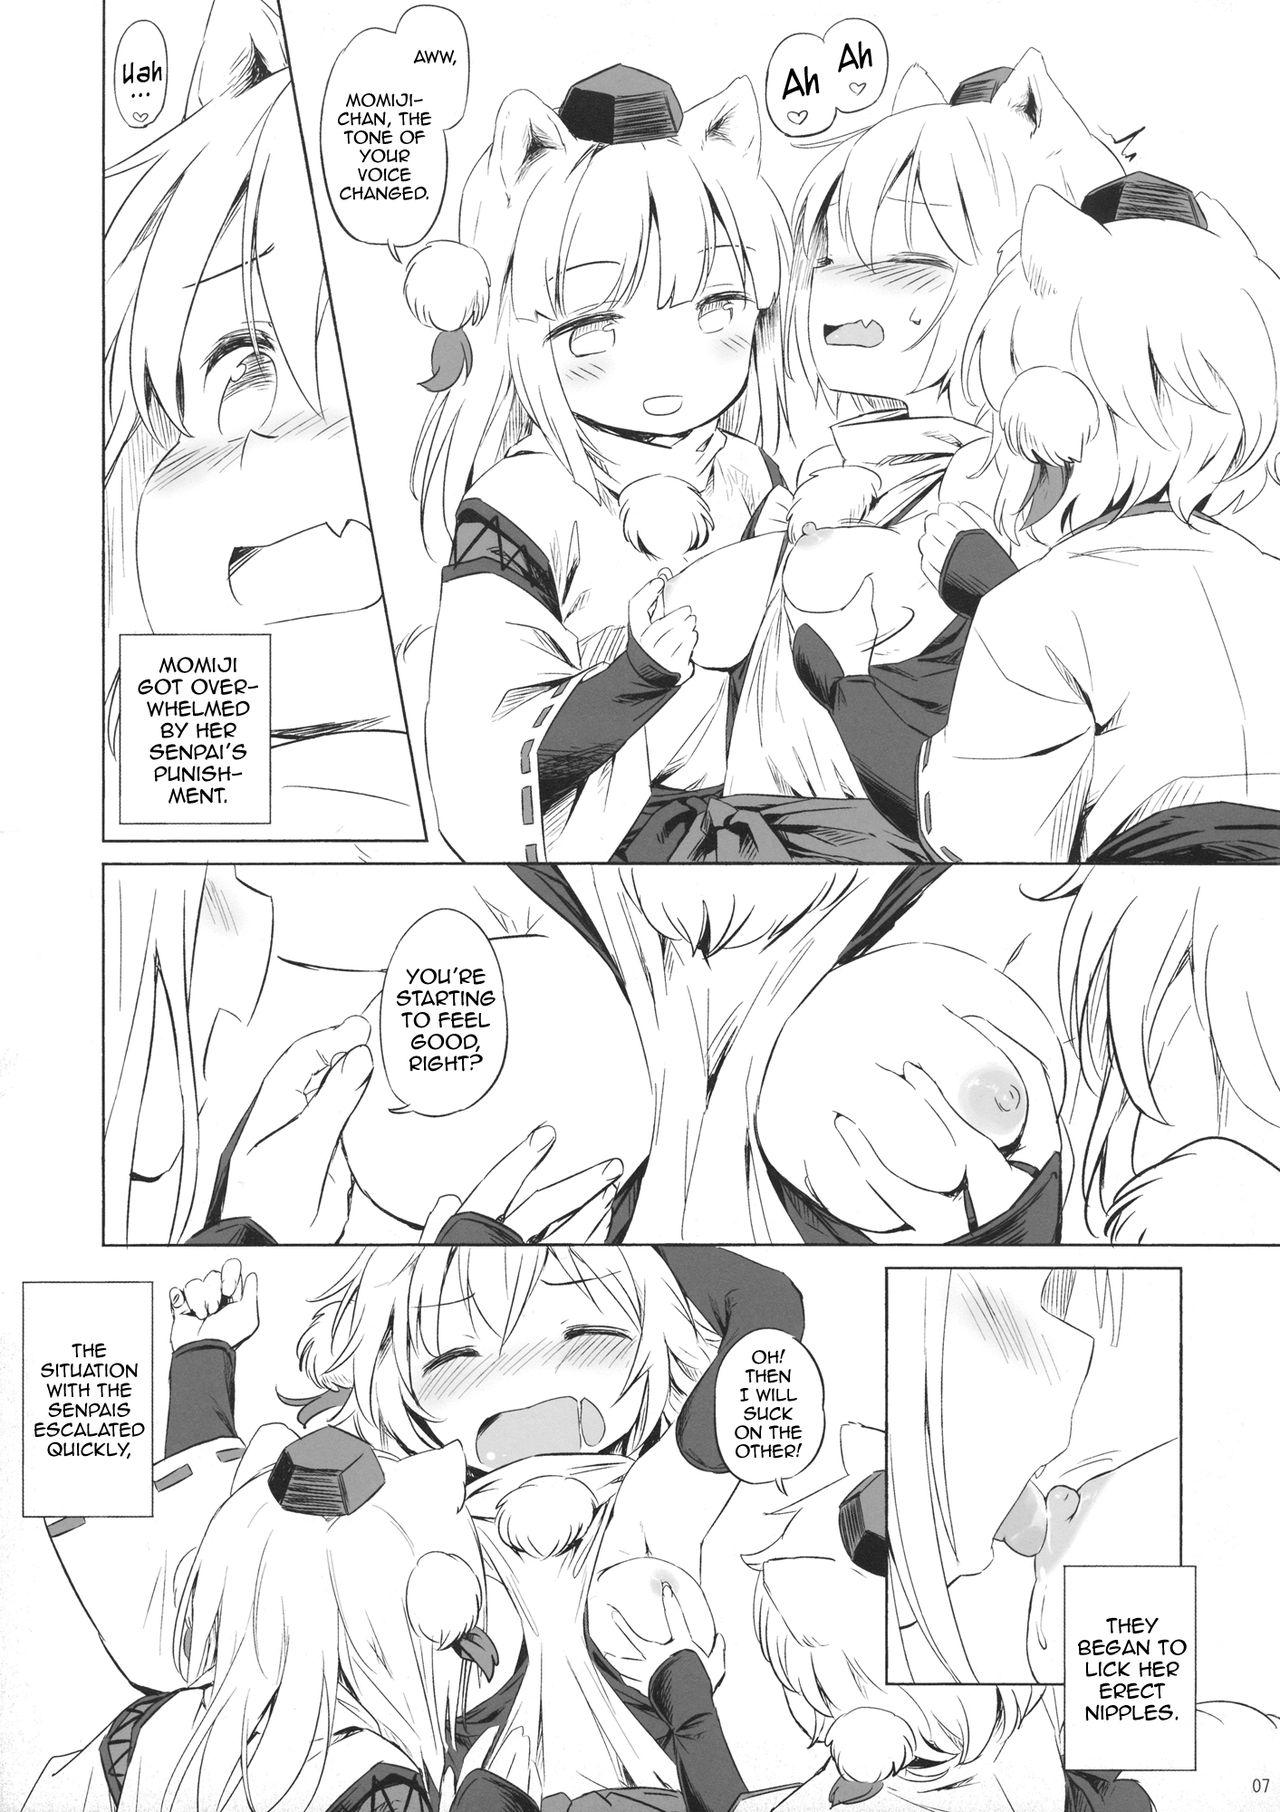 Muscles Kisetsu no Wanko | All around the four seasons with Doggies - Touhou project Doggystyle - Page 6